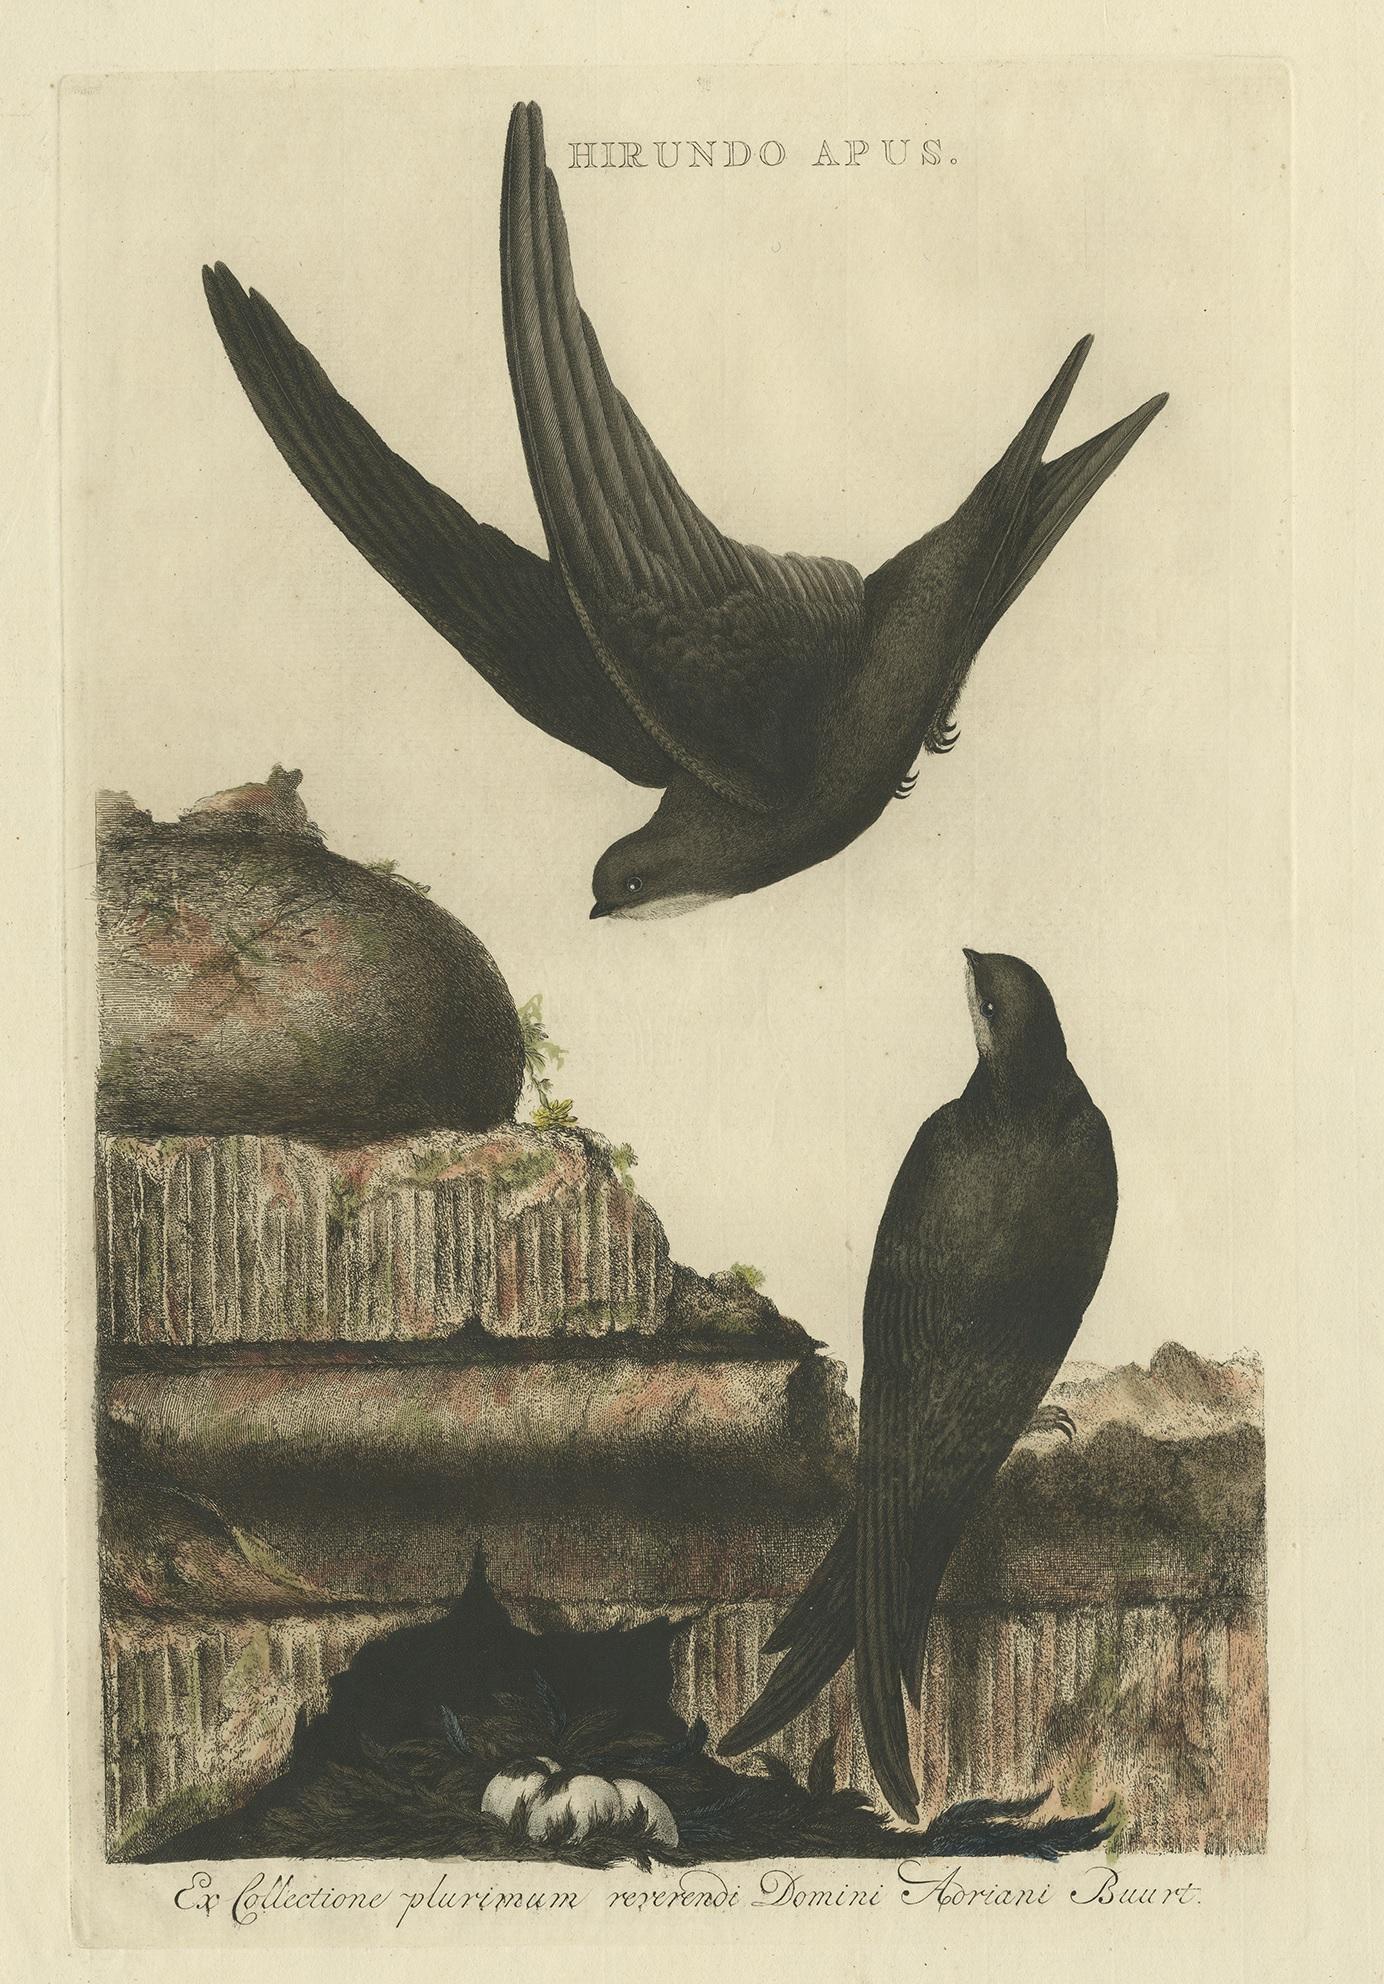 Antique print titled 'Hirundo Apus'. This print depicts the common swift with nest and eggs. (Dutch: gierzwaluw). The common swift (Apus apus) is a medium-sized bird, superficially similar to the barn swallow or house martin but somewhat larger,